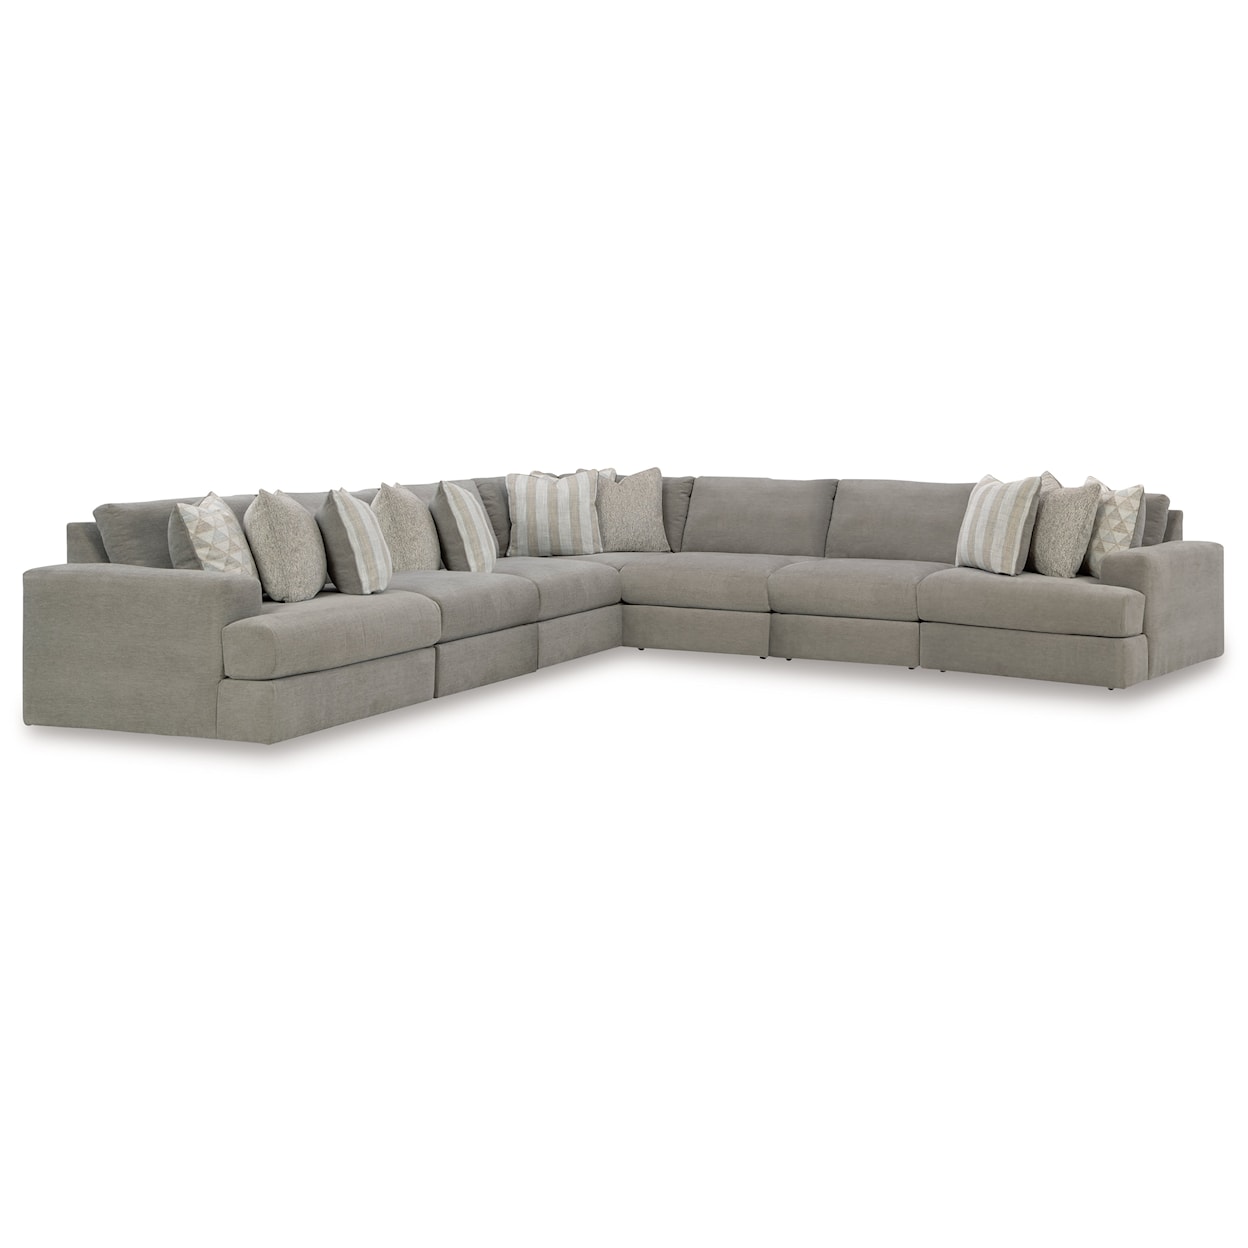 Signature Design by Ashley Avaliyah 7-Piece Sectional